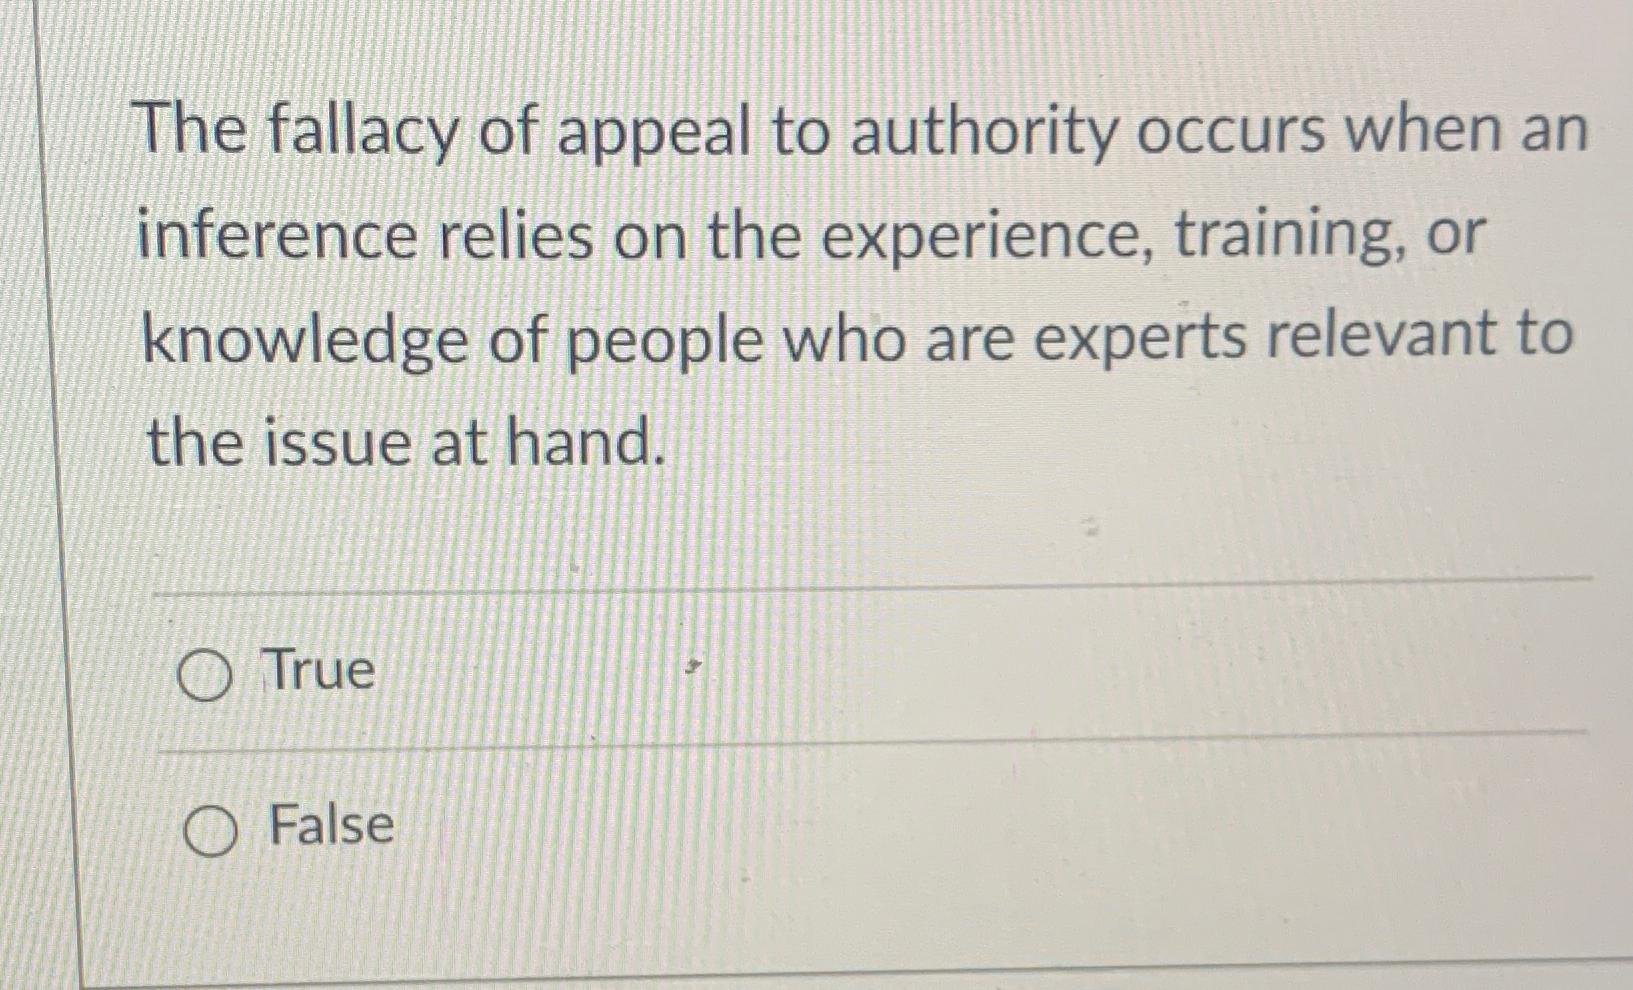 The fallacy of appeal to authority occurs when an inference relies on the experience, training, or knowledge